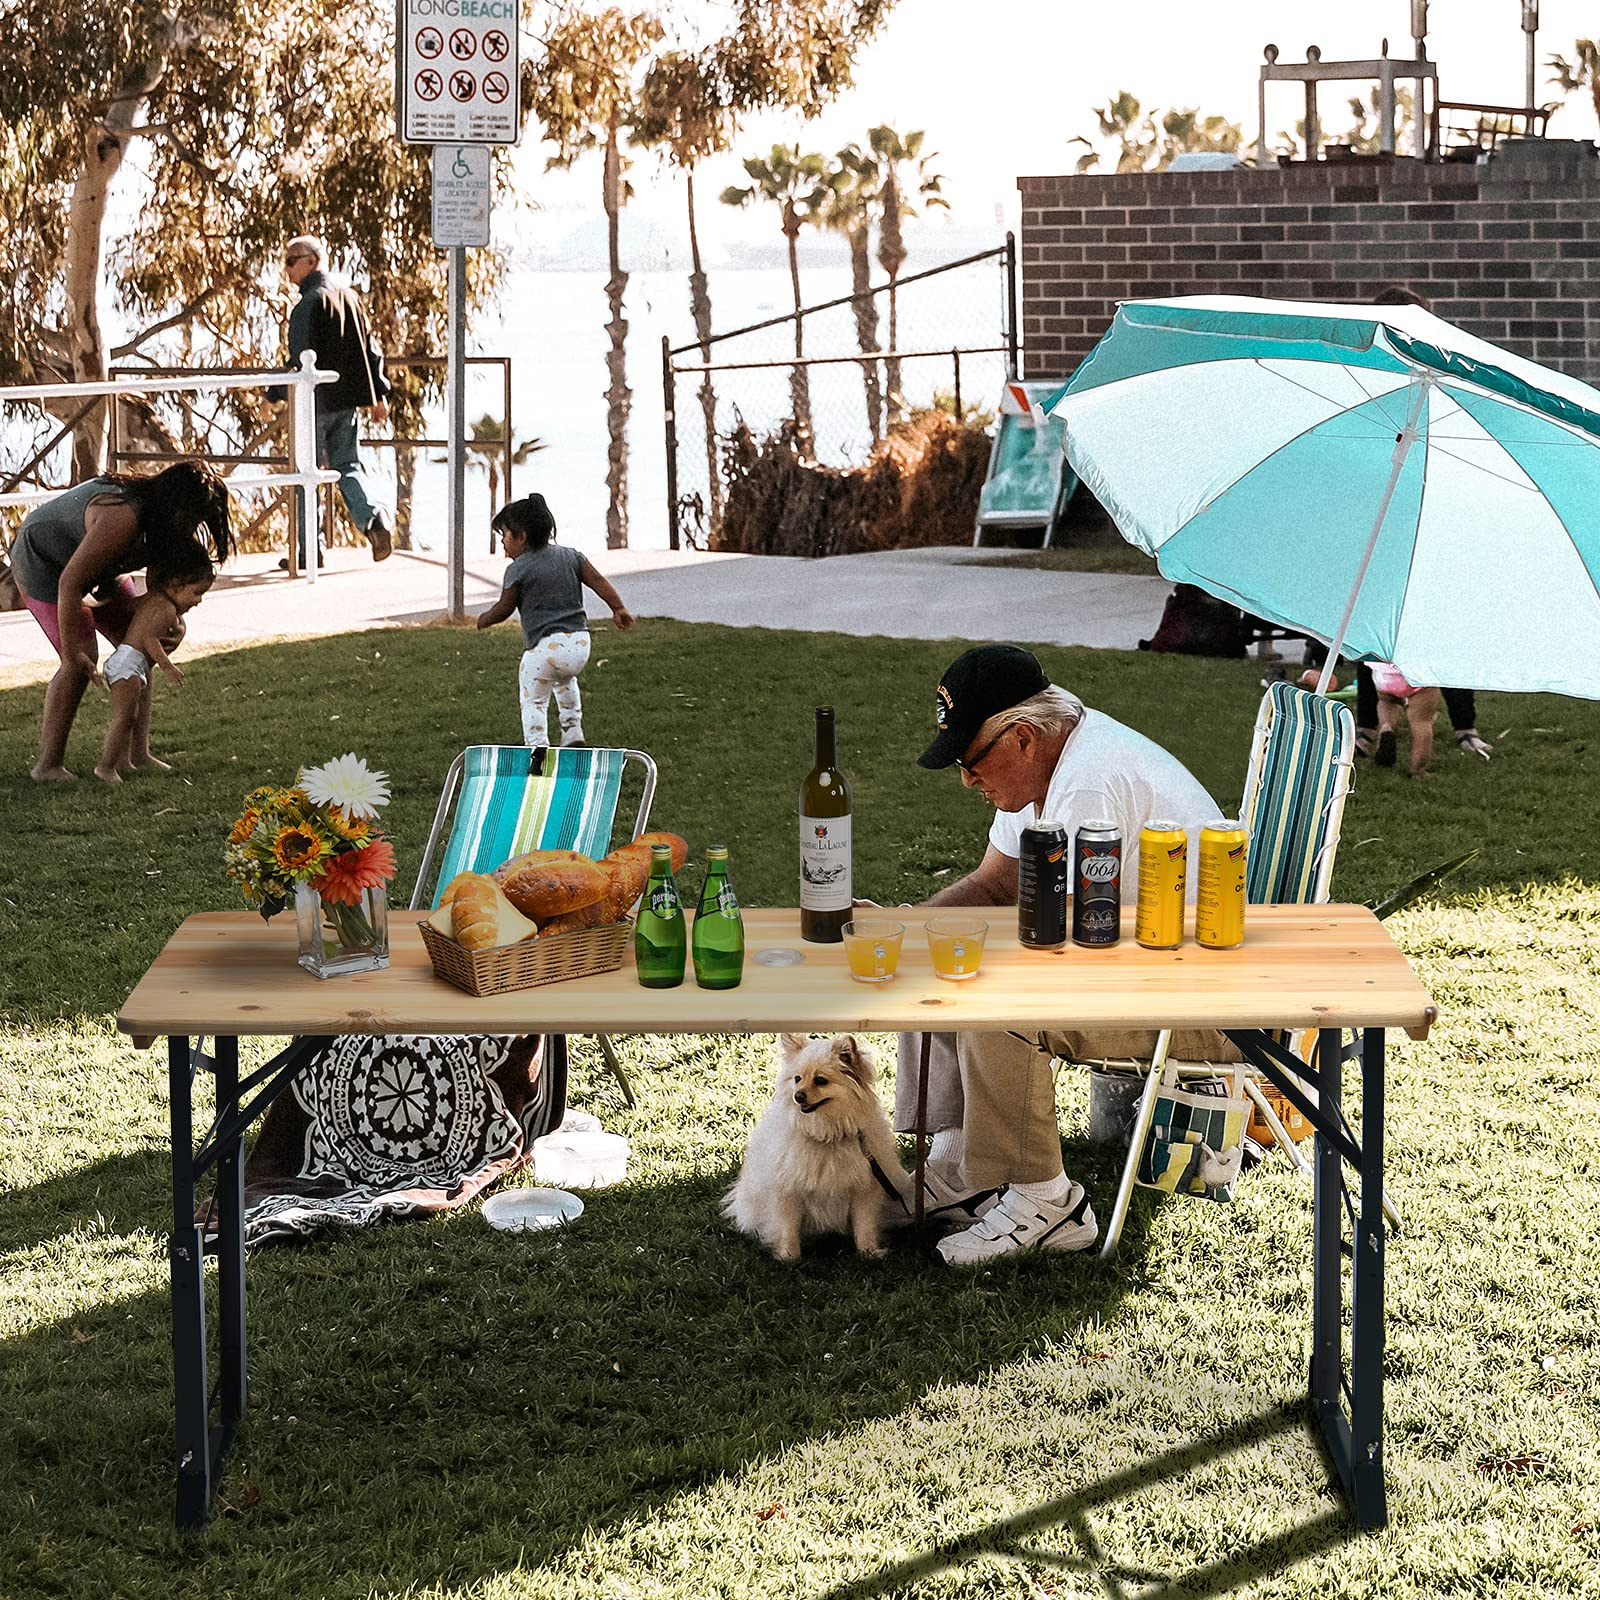 Giantex Folding Camping Table, Roll-Up Folding Table w/Carry Bag, Portable  Aluminum Picnic Table, Low Height Beach Table for Outdoor Use, Travel, BBQ